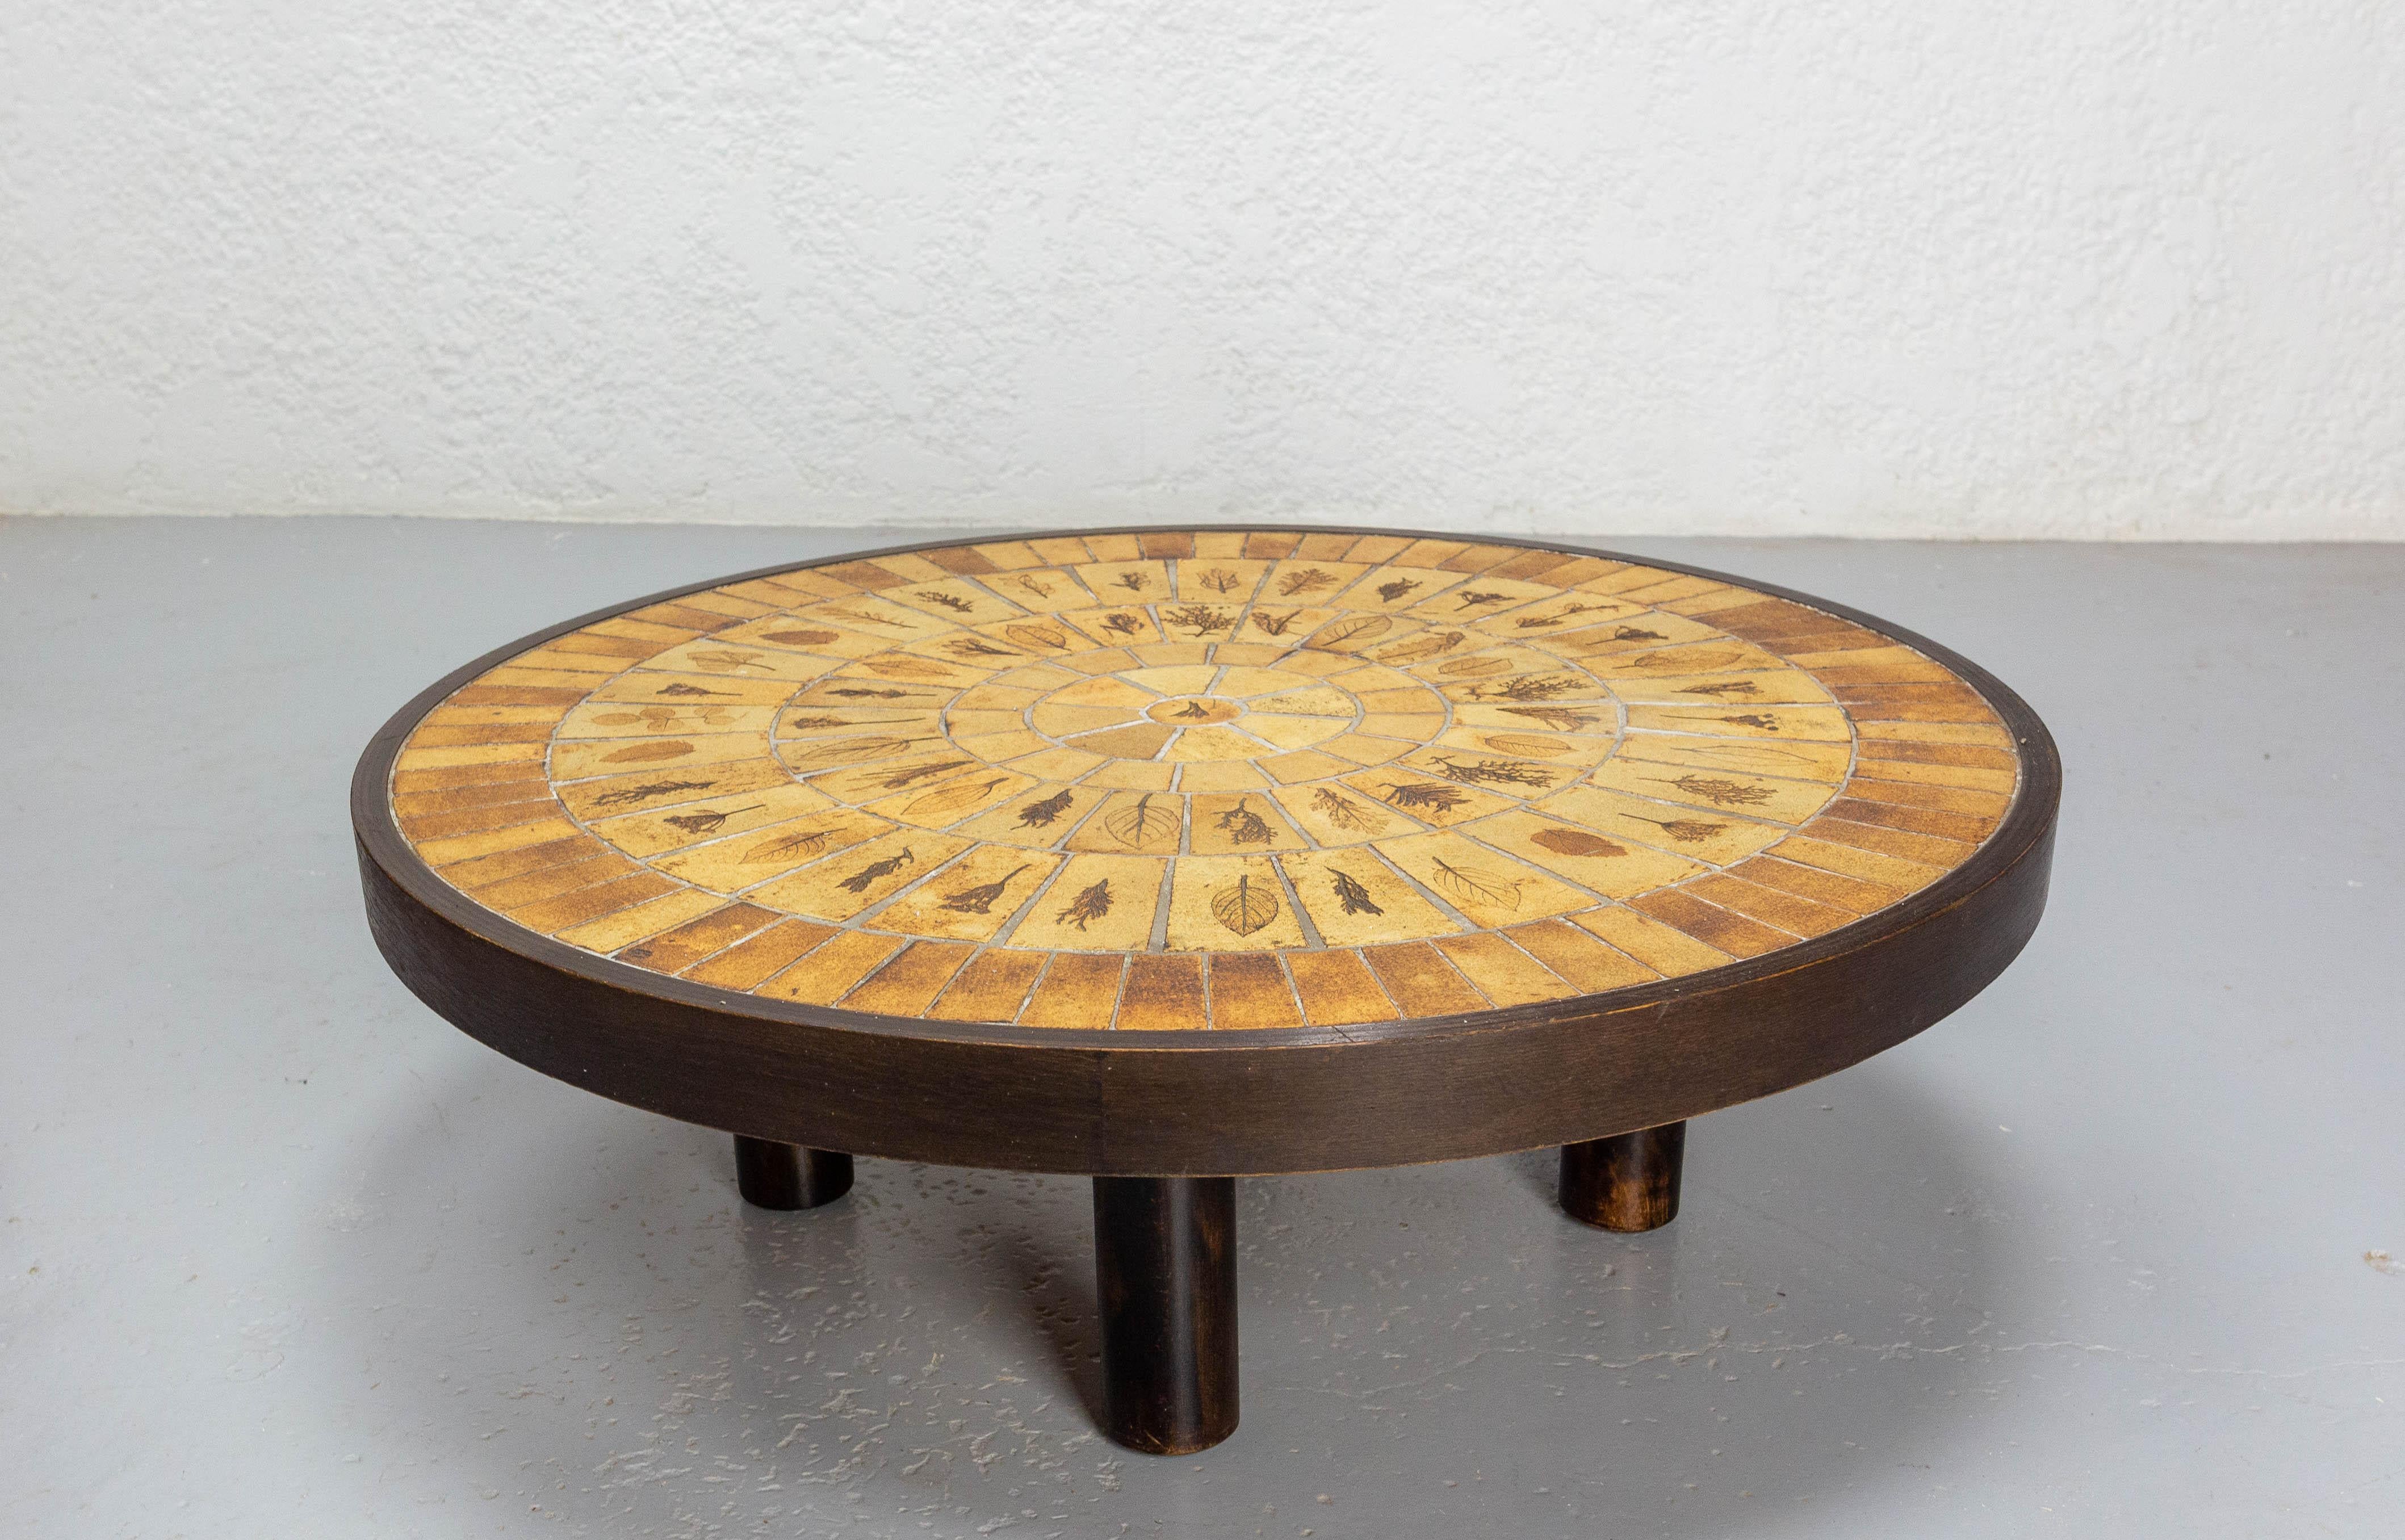 Round coffee table with faience top signed Roger Capron and made in Vallauris.
This table comes from the 'Garrigue' serie and has an elegant designed top that is equipped with organic, floral motives.
French, midcentury
Ceramic and wood

Good